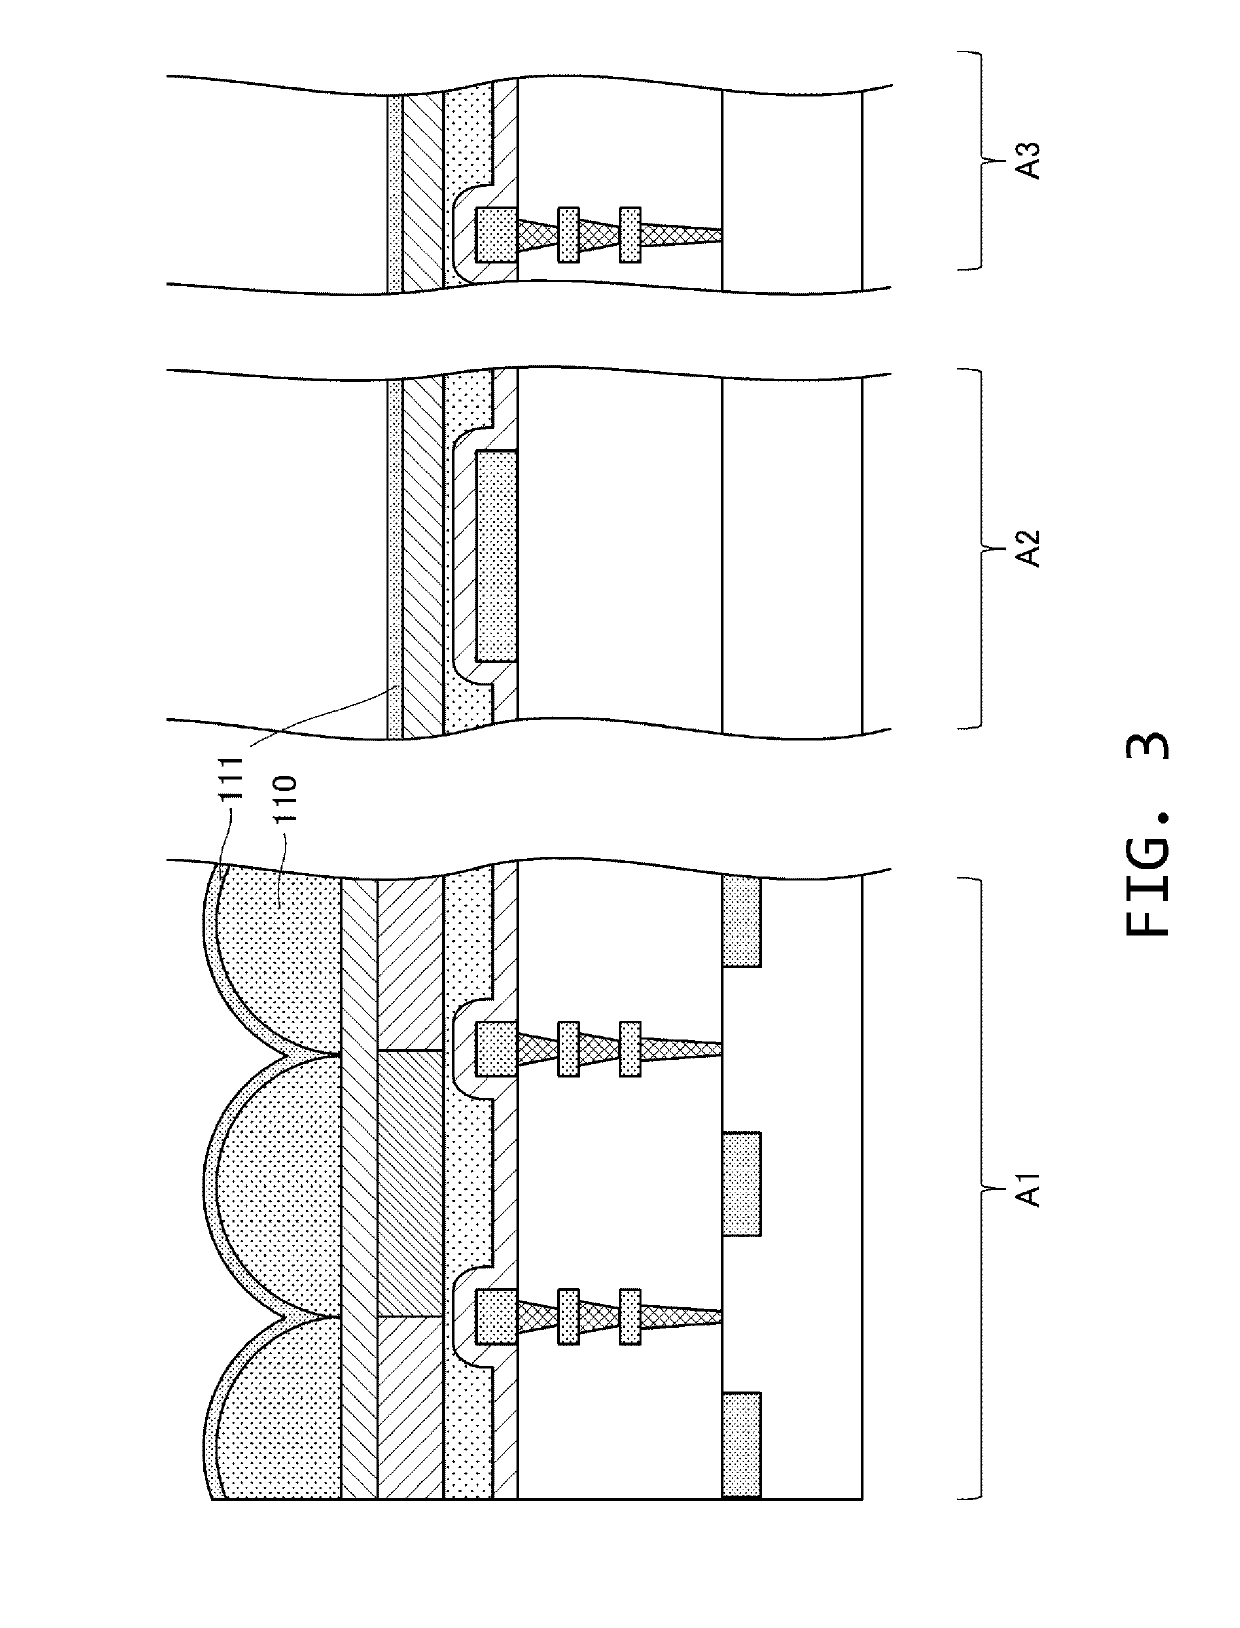 Image pickup device and display device